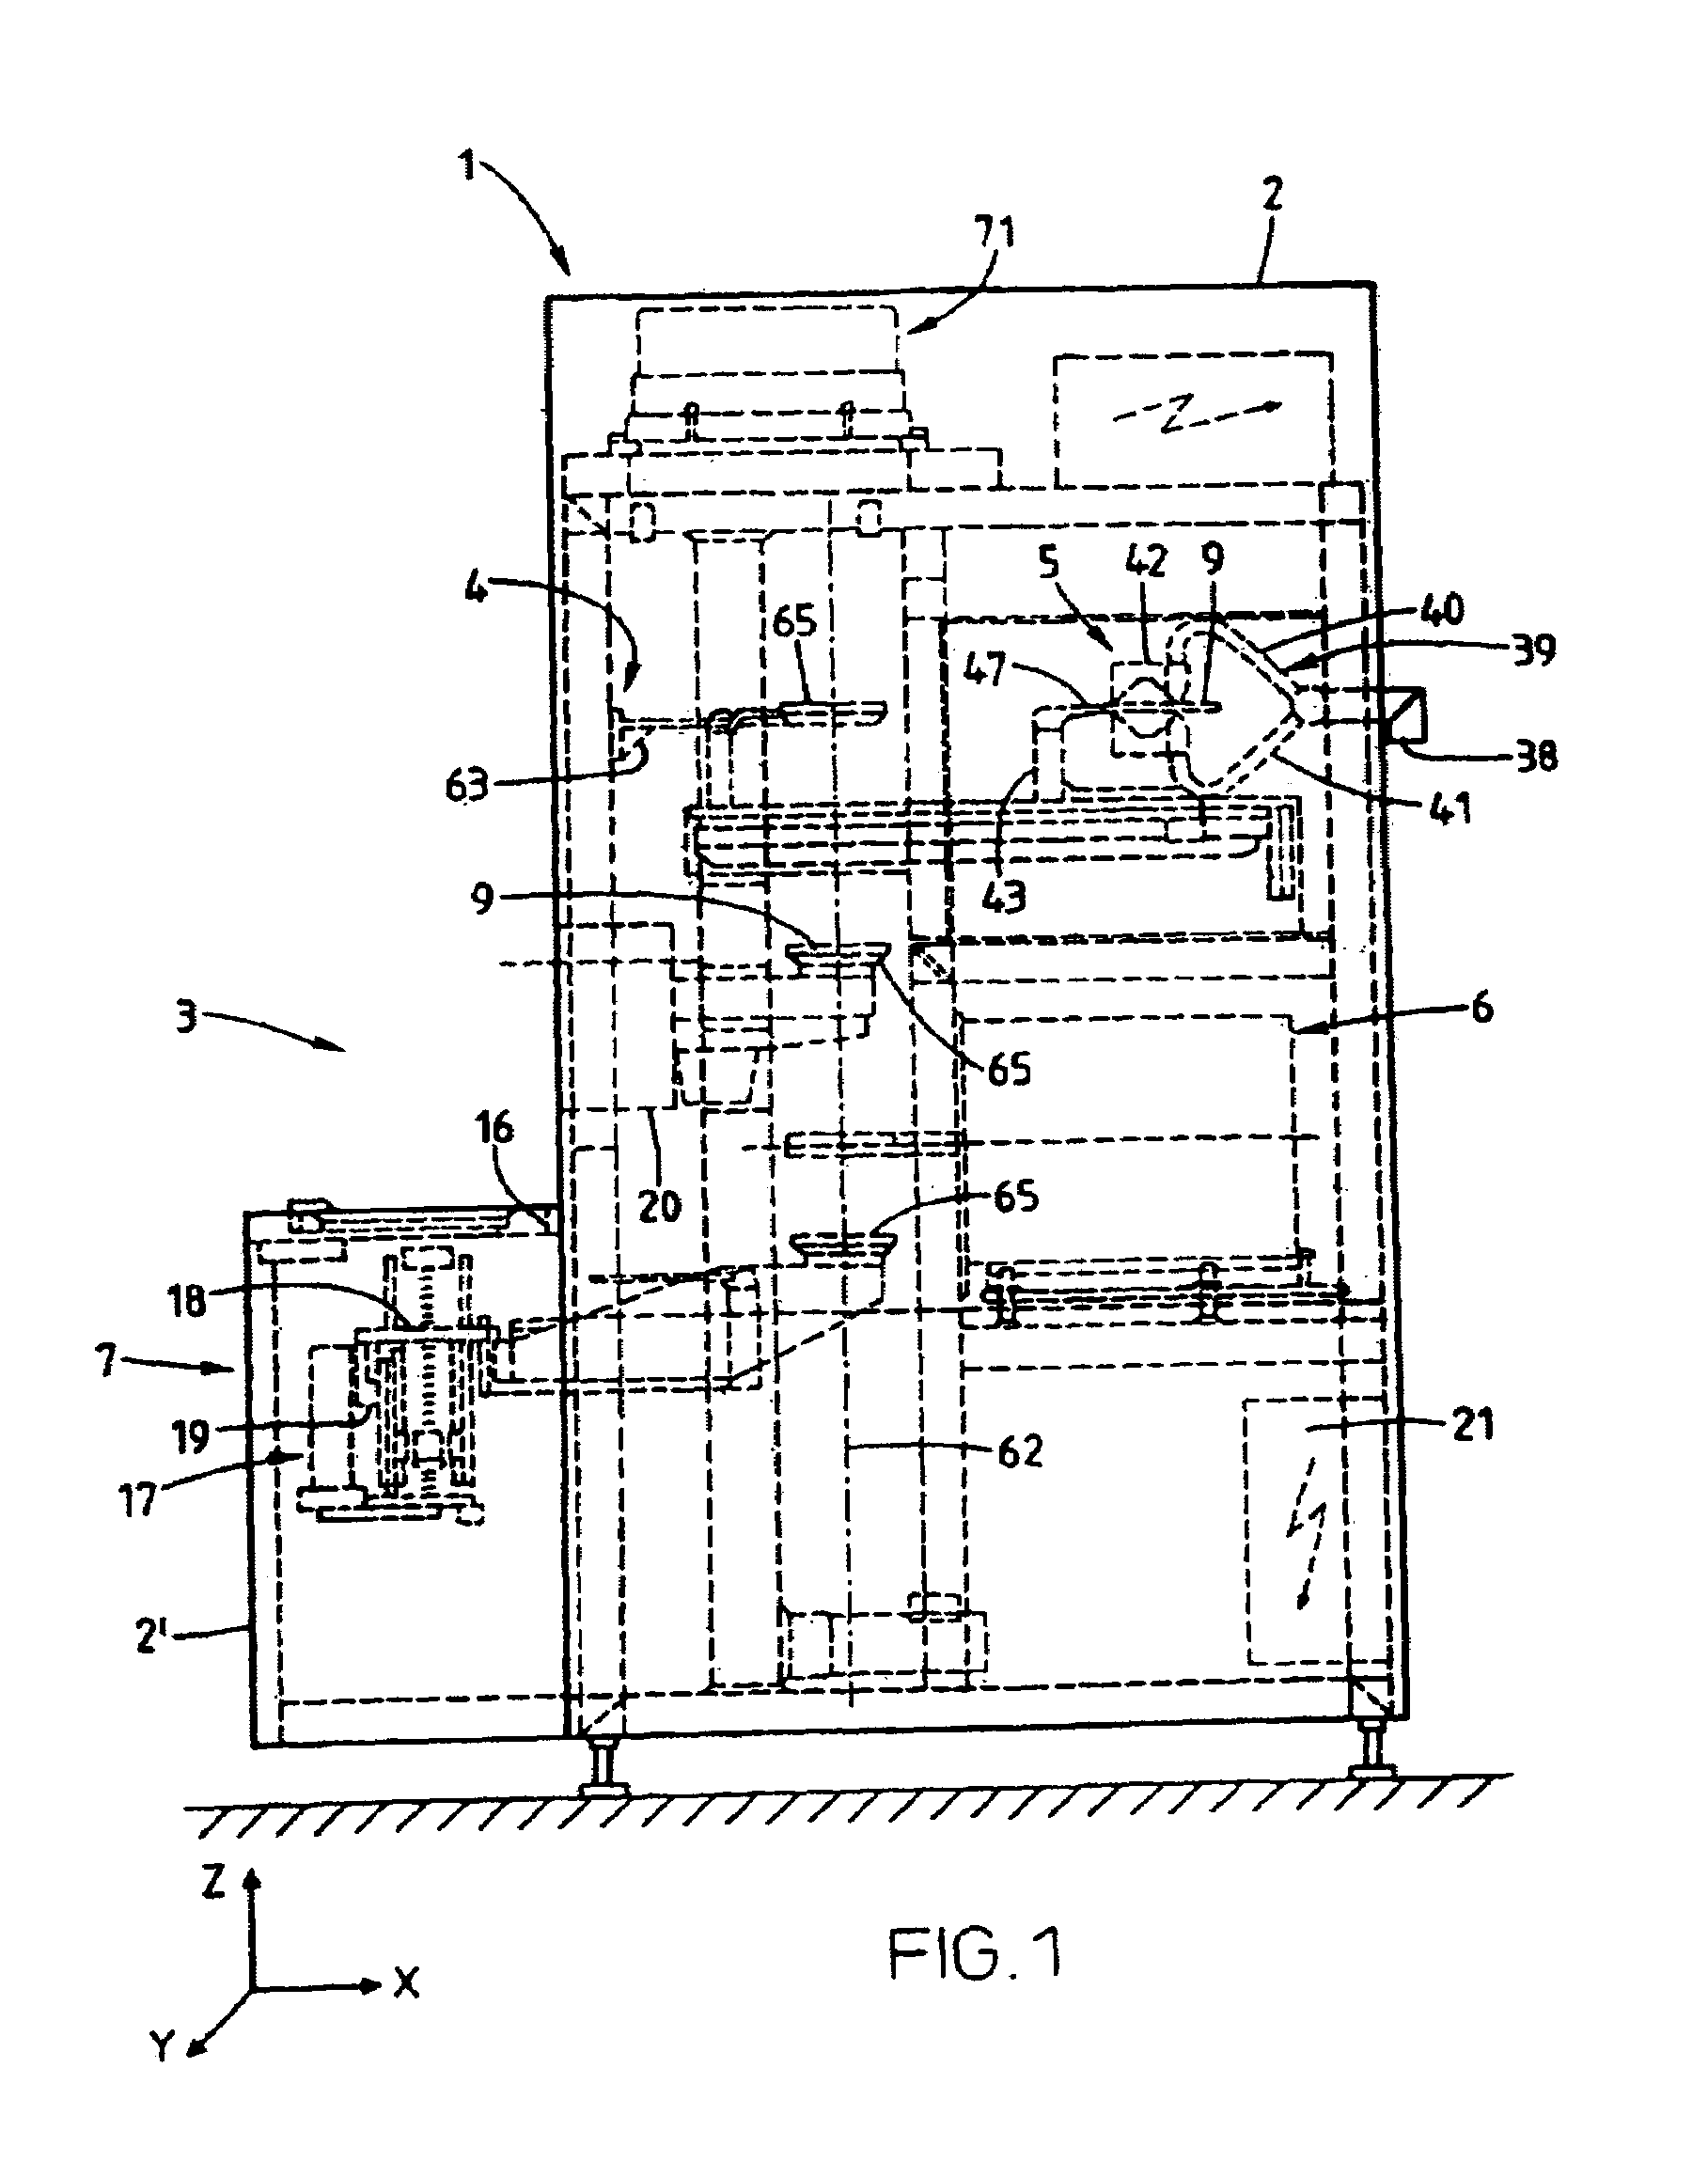 Device and method for cleaning articles used in the production of semiconductor components